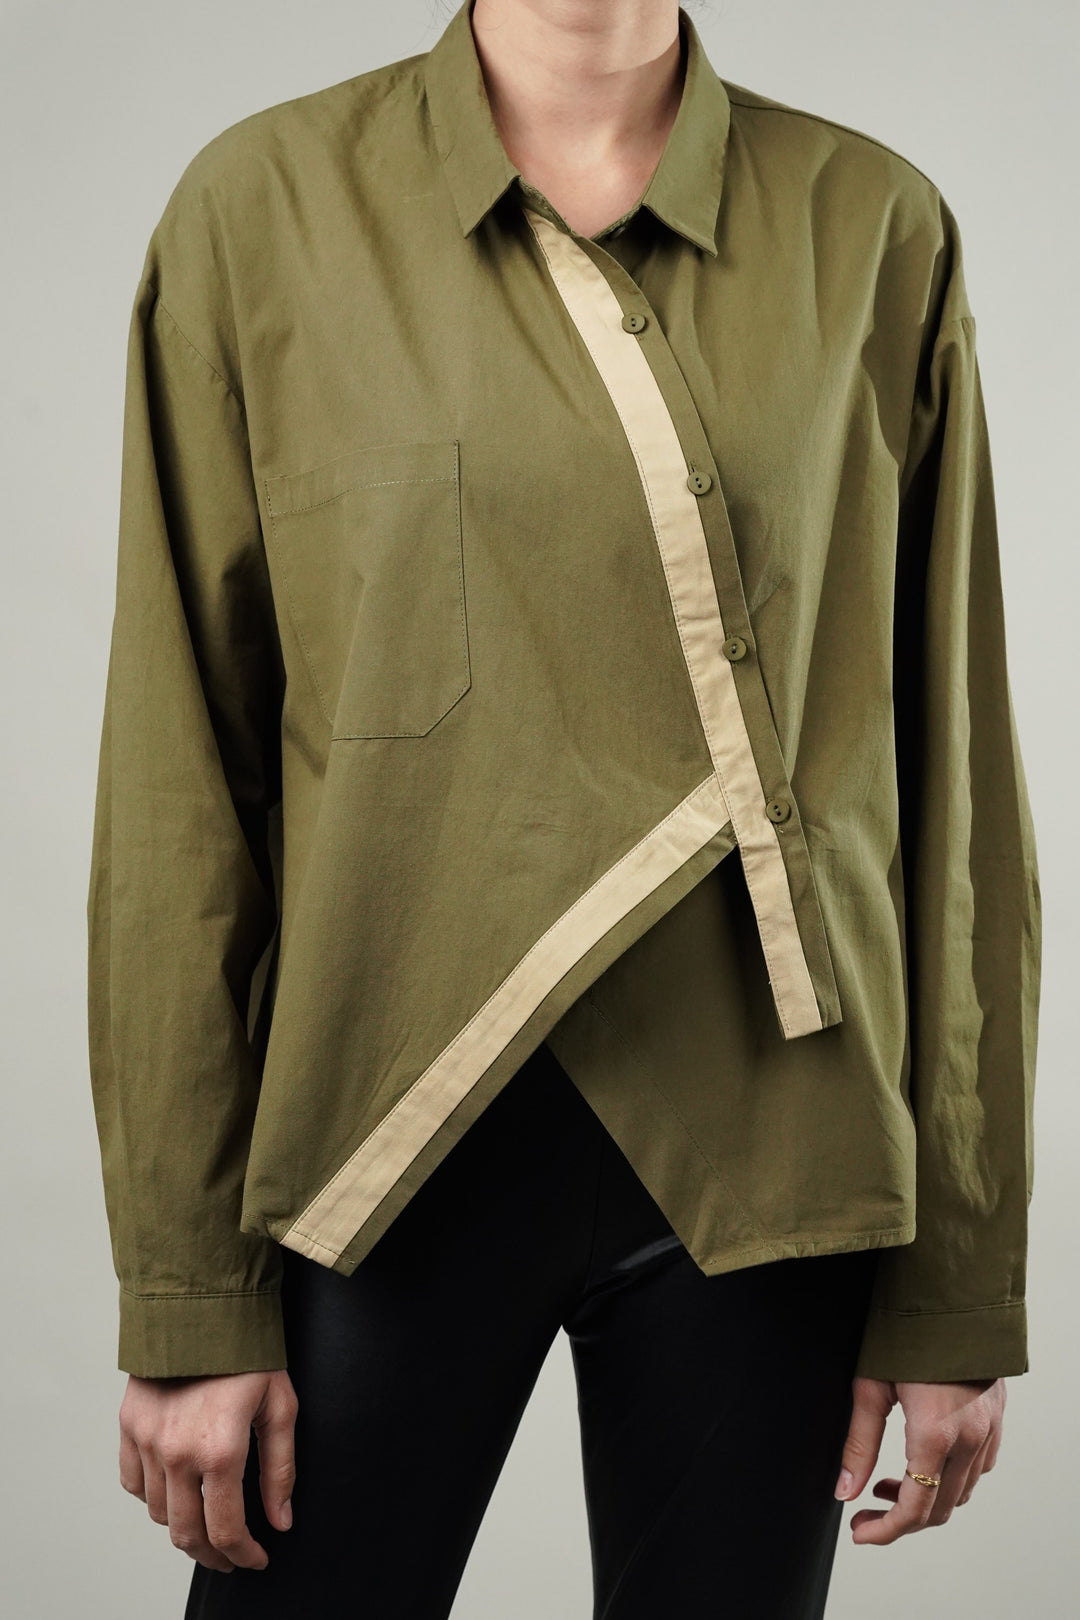 Olive green oversized shirt for vacation